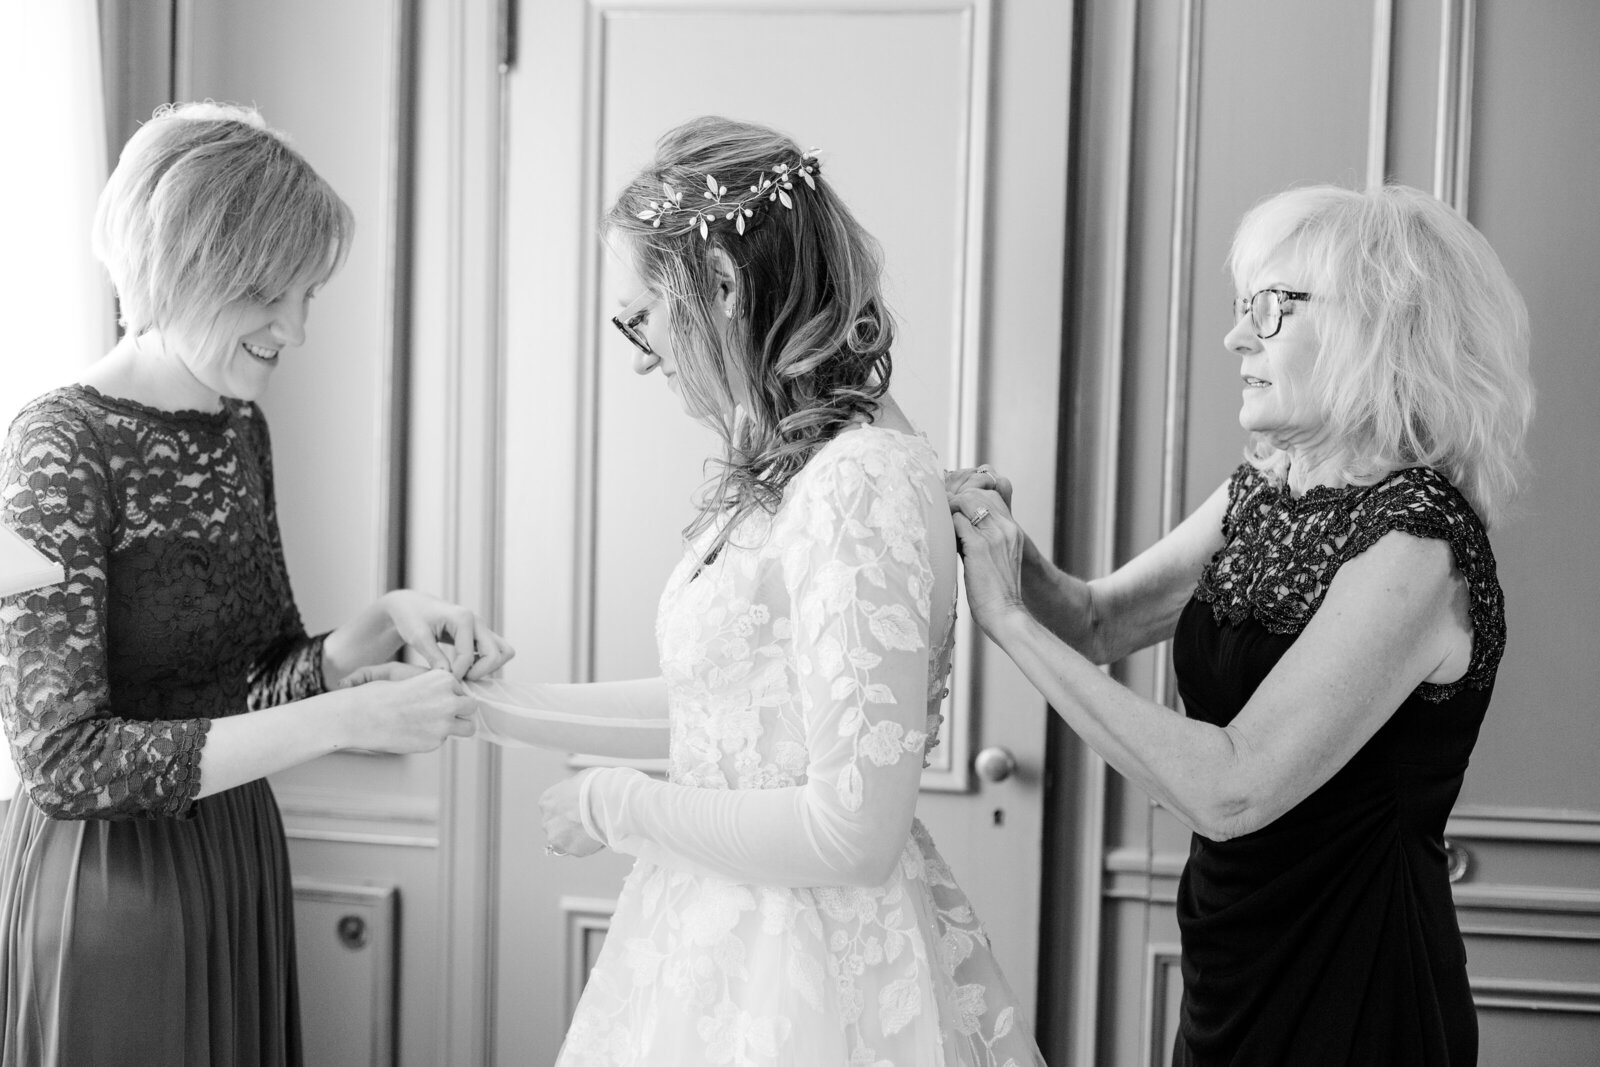 A candid moment between a bride, her mother and sister at Tulsa's Dresser Mansion.